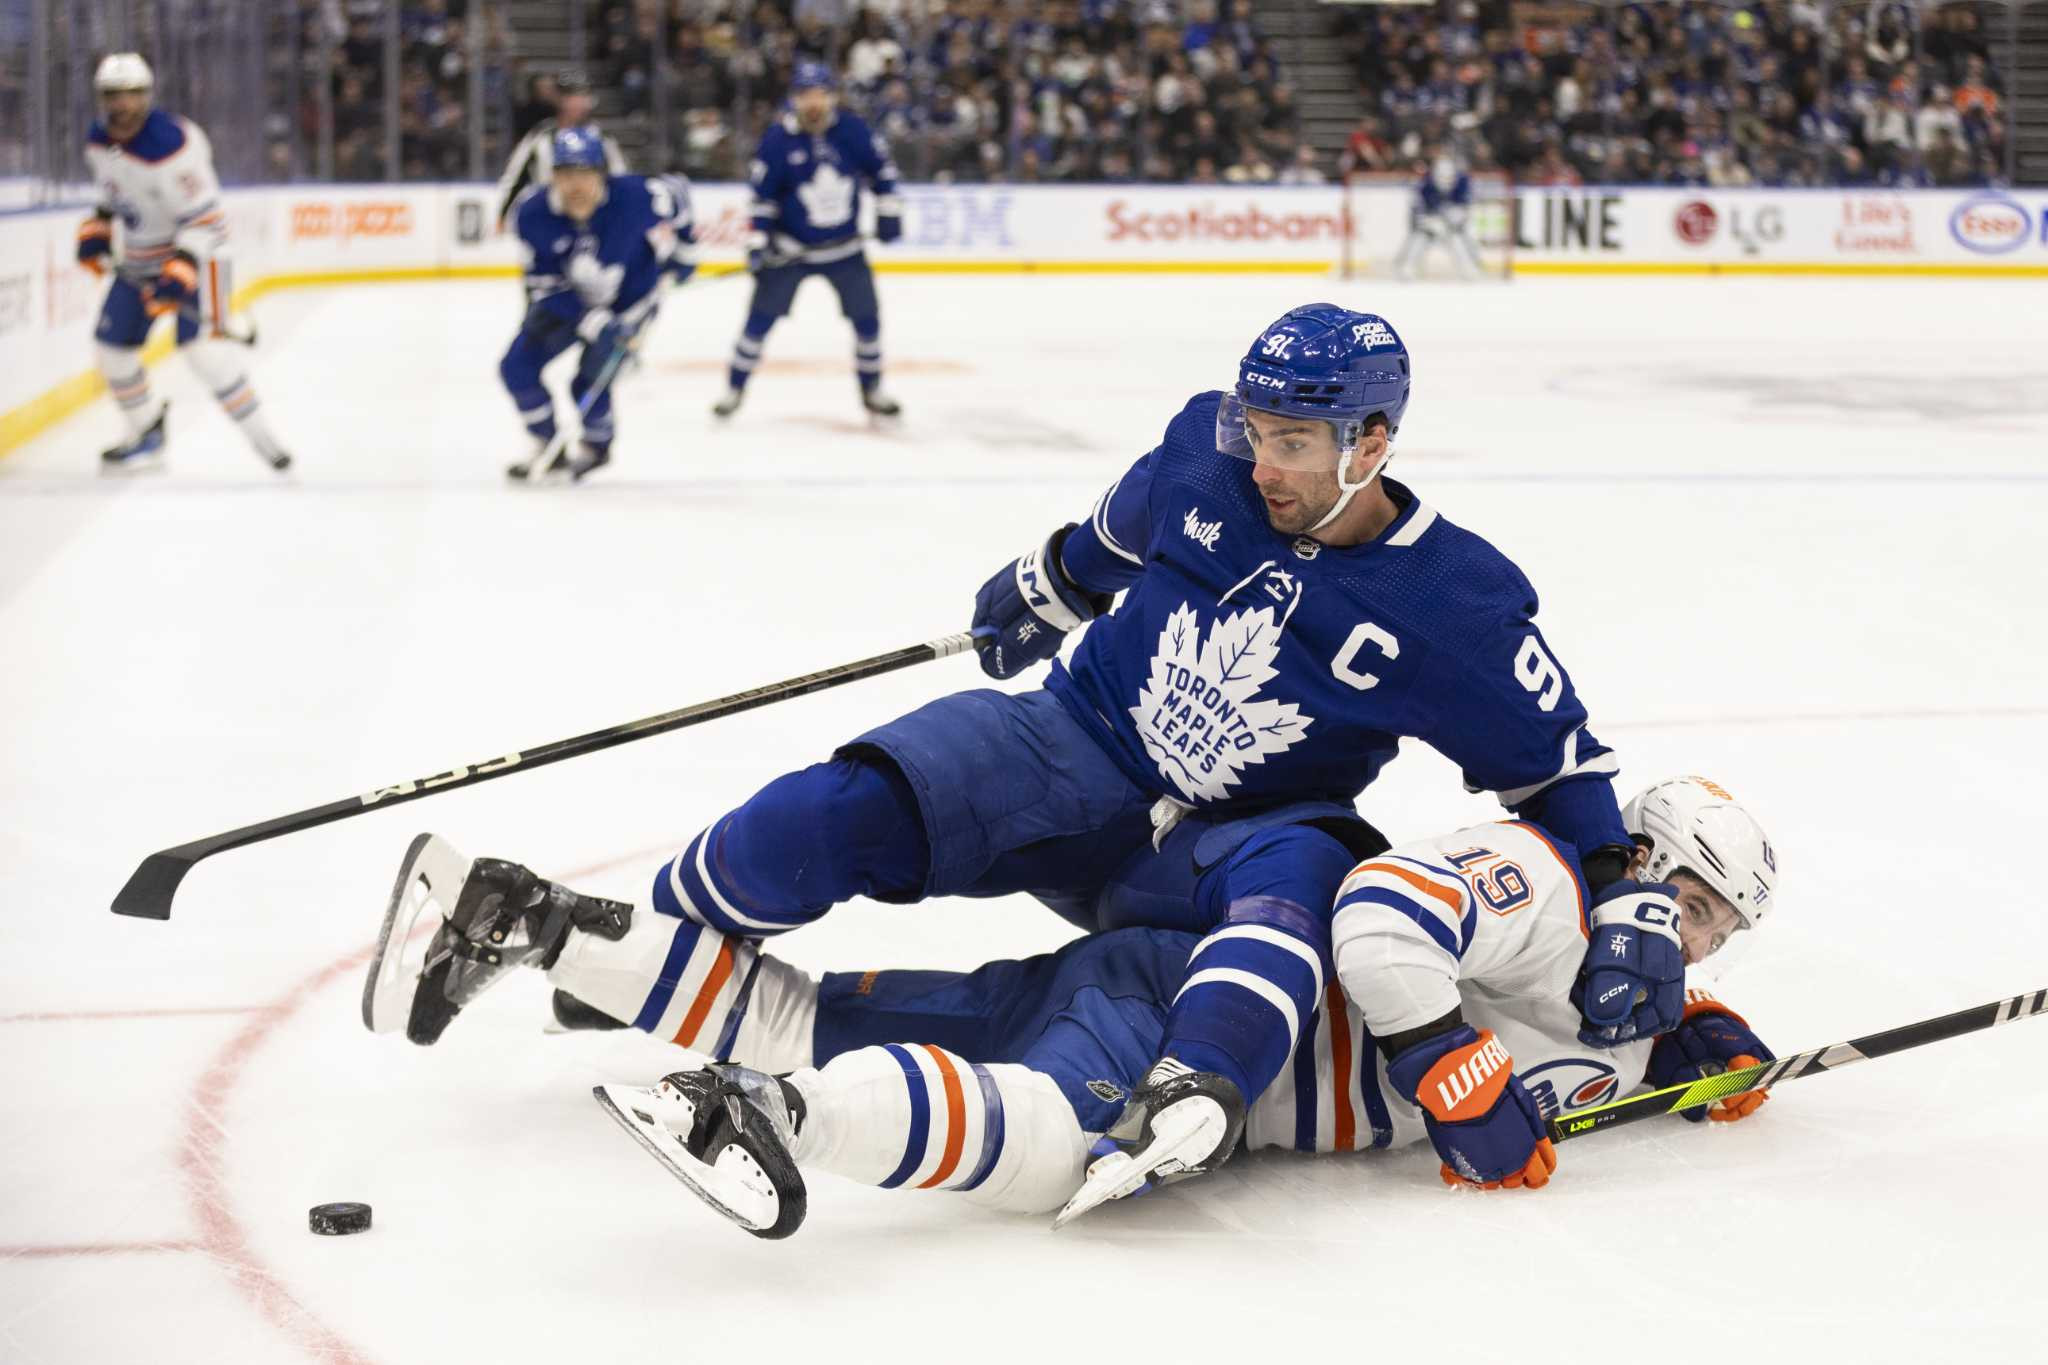 McMann, Holmberg Shine as Maple Leafs Beat Oilers 6-3